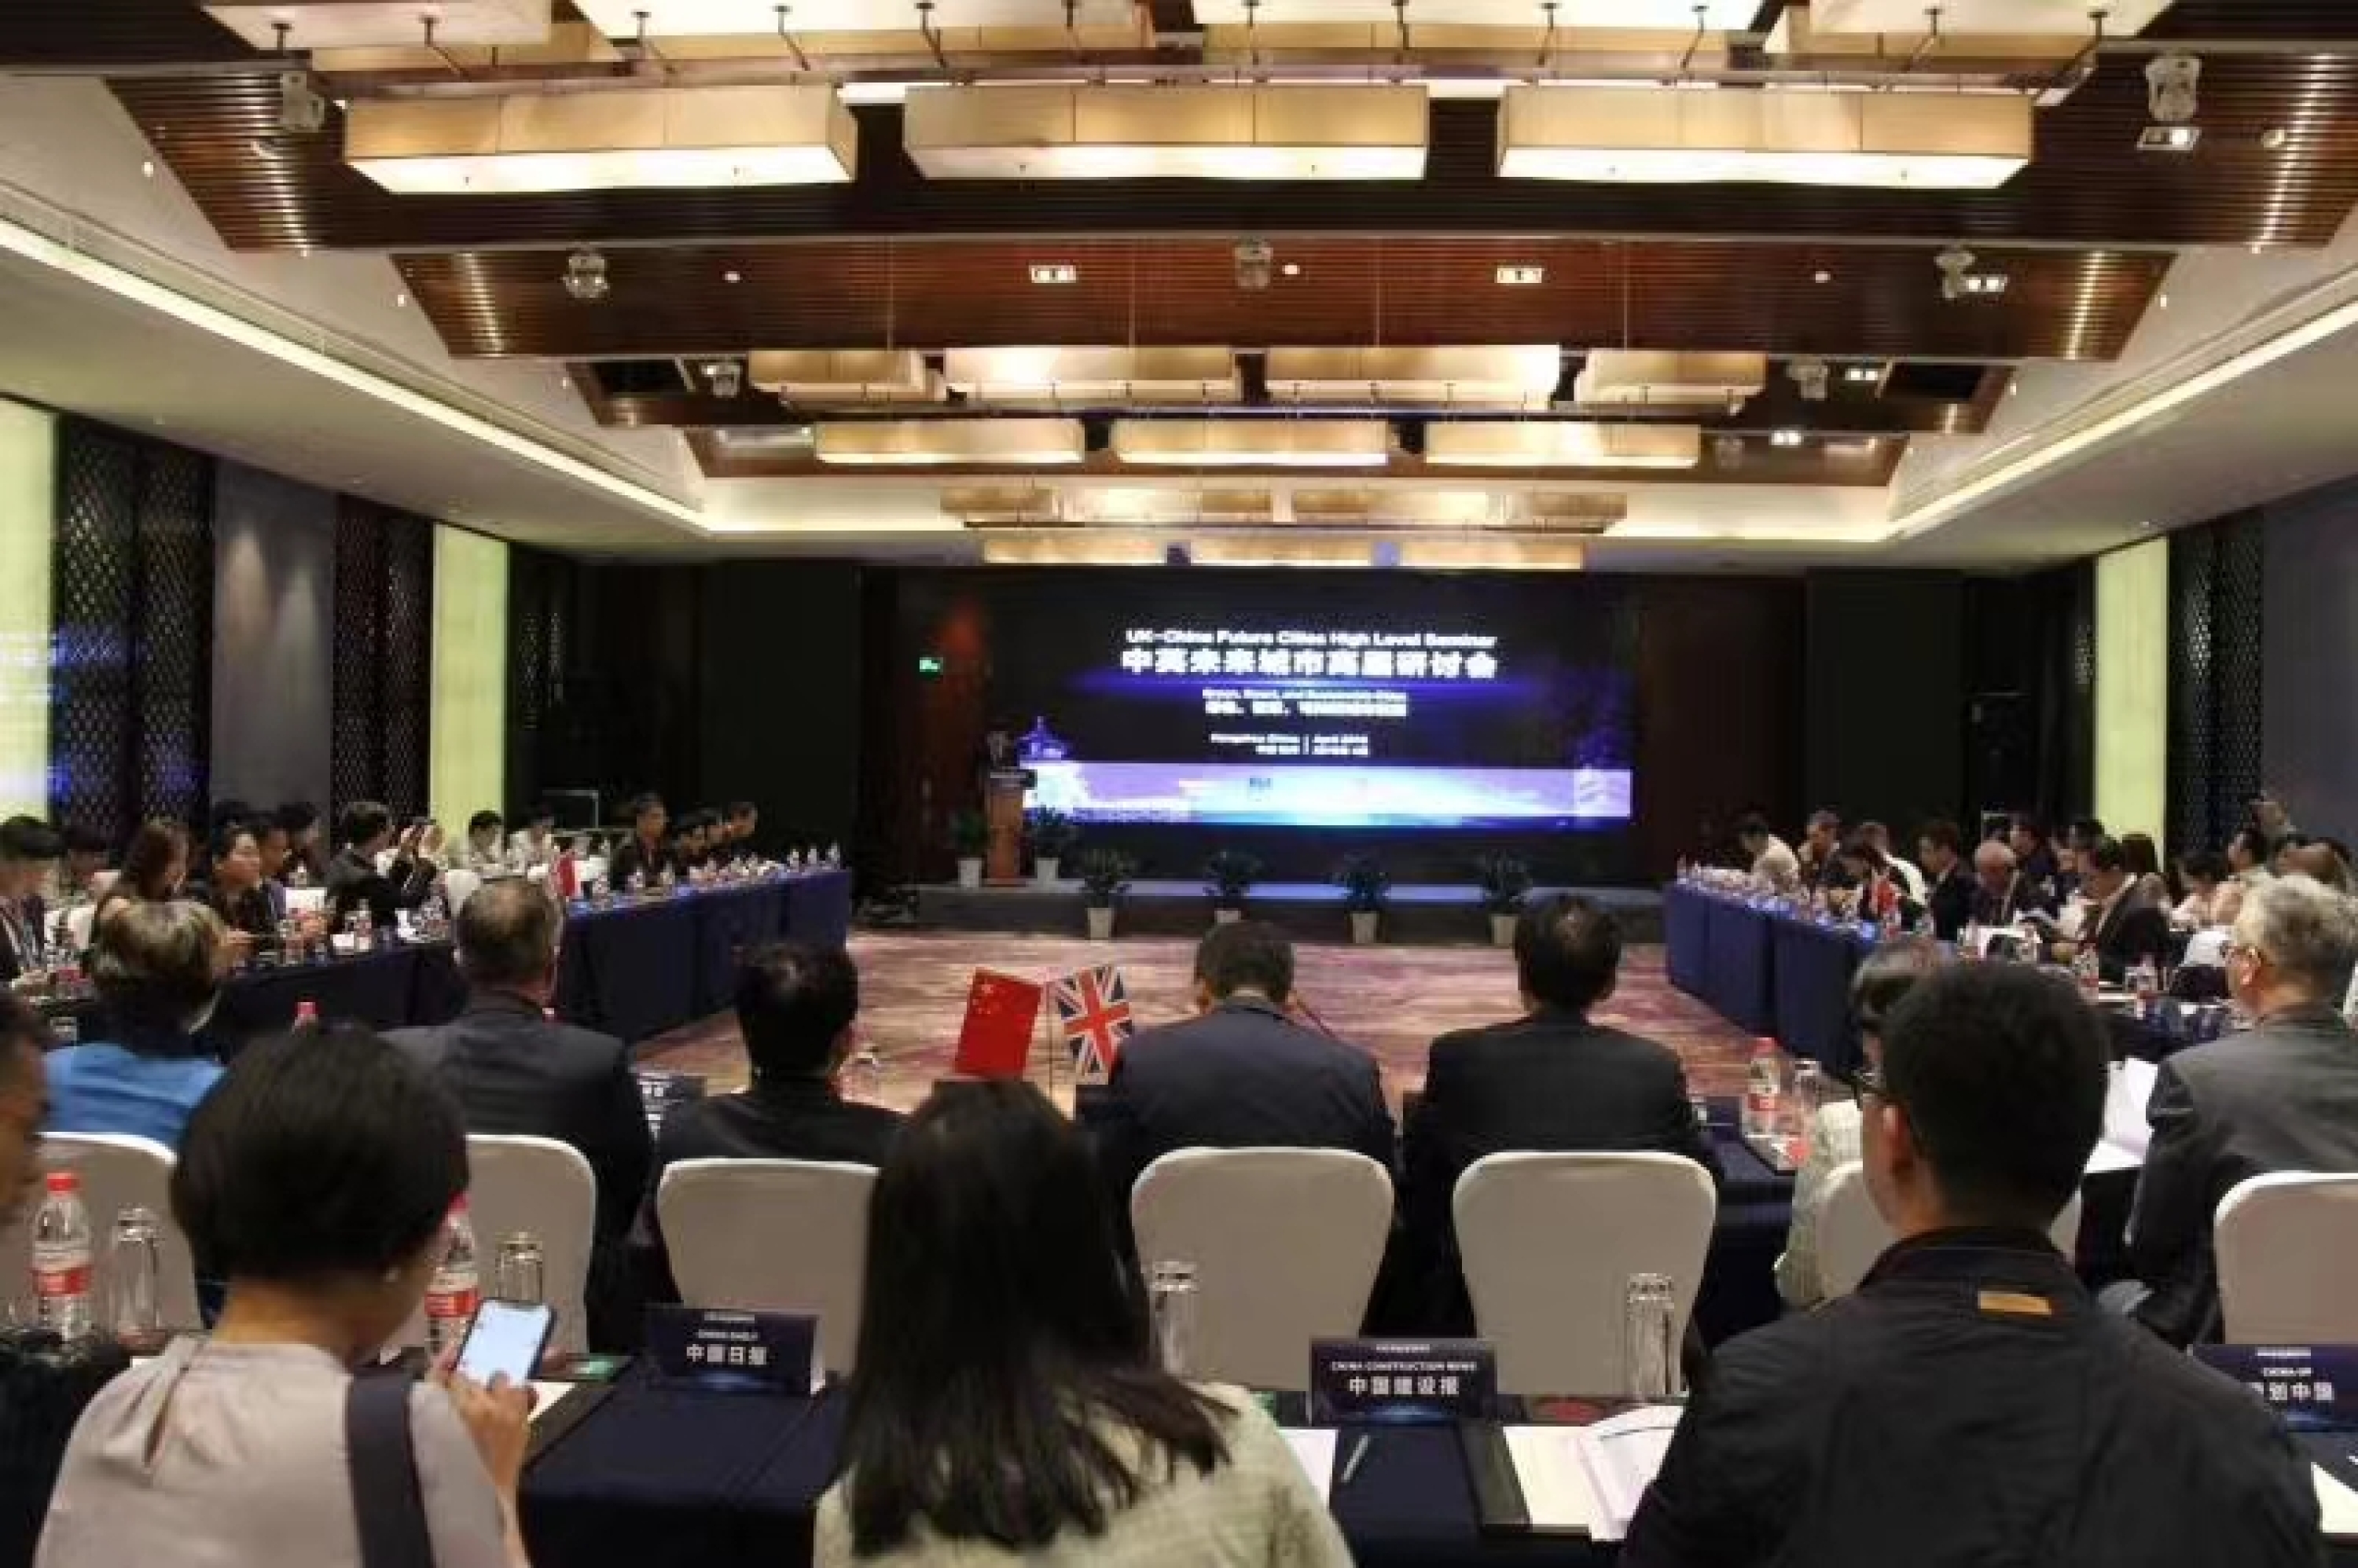  Zigeng Wang was Invited to Attend the China-UK Future City Summit and Deliver a Keynote Speech